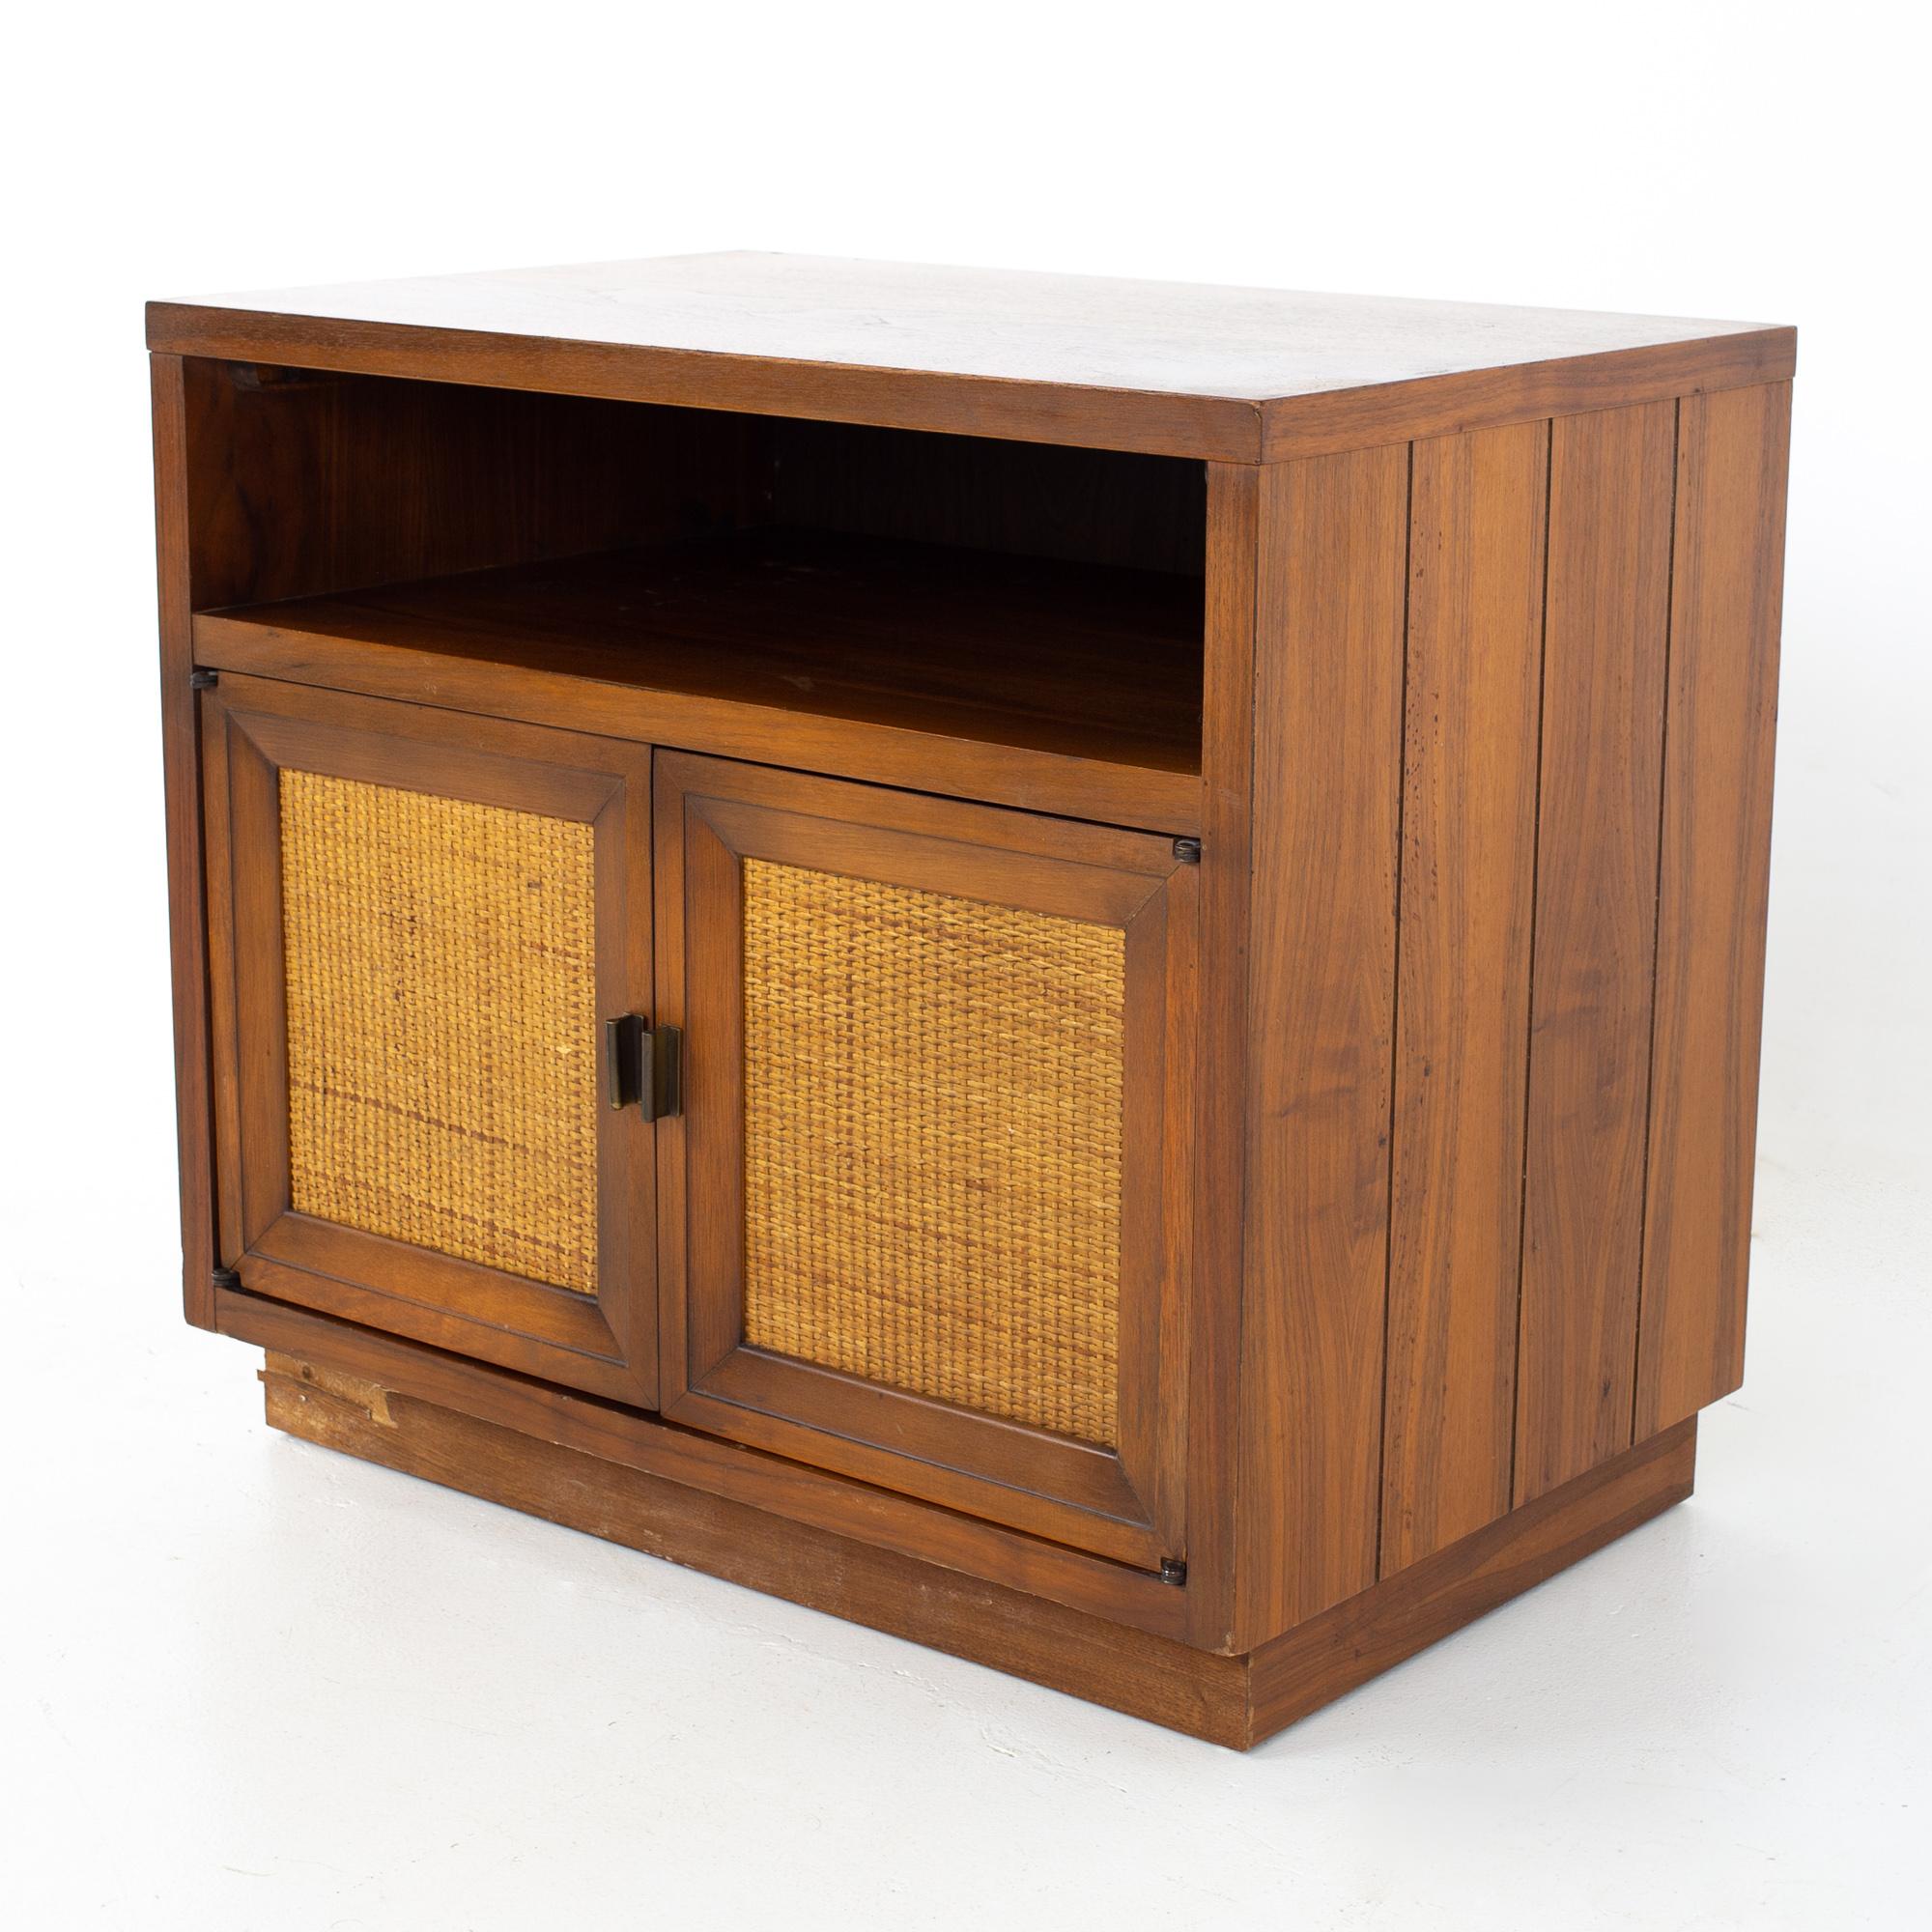 Lane mid century walnut and cane plinth base nightstand
Nightstand measures: 26 wide x 17 deep x 23 inches high

All pieces of furniture can be had in what we call restored vintage condition. That means the piece is restored upon purchase so it’s